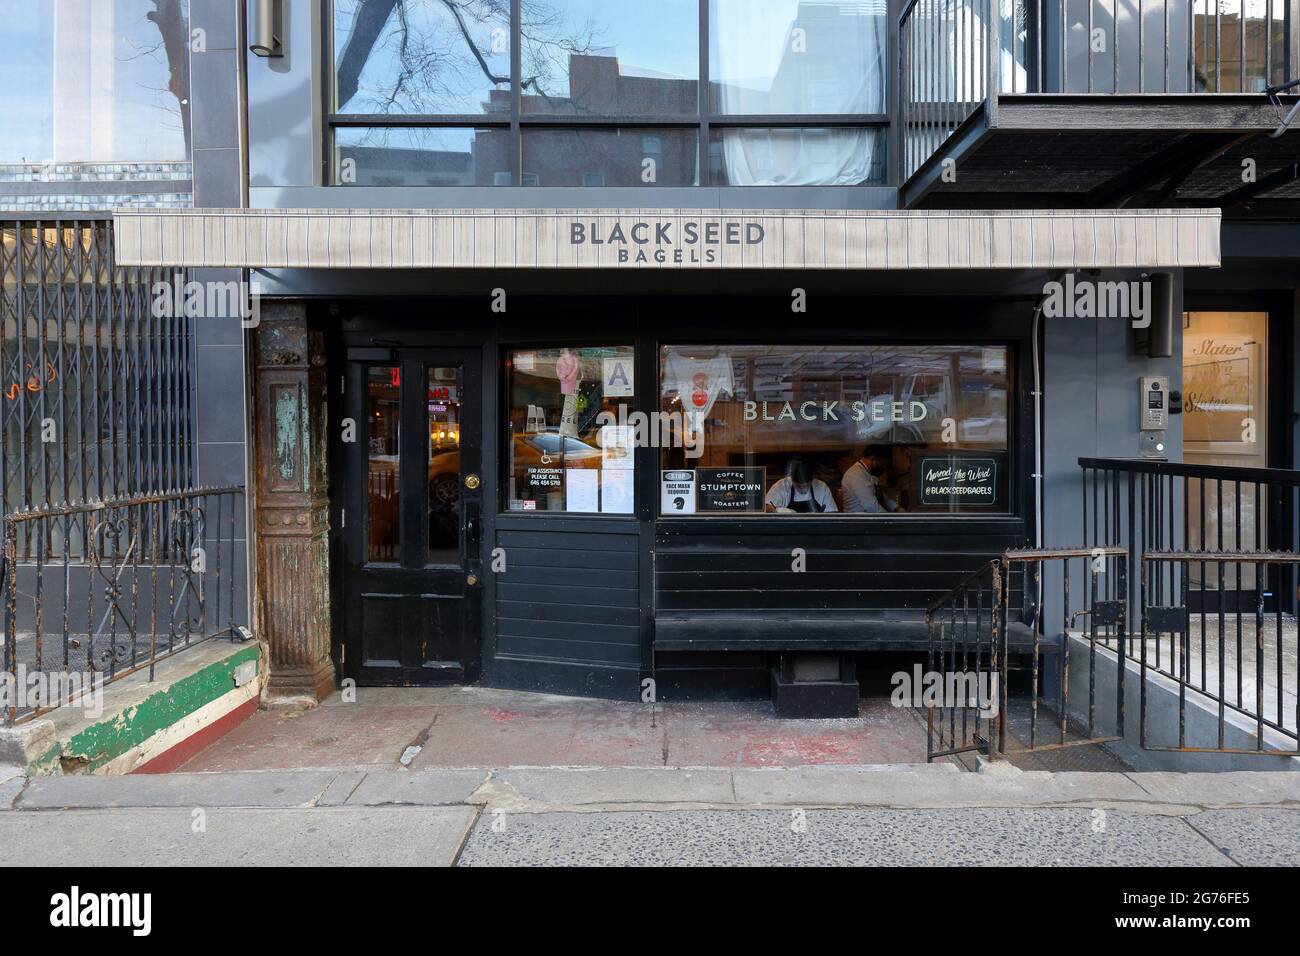 Black Seed Bagels, 176 First Ave, New York, NYC storefront photo of a wood-fired oven bagel shop in the East Village neighborhood of Manhattan. Stock Photo